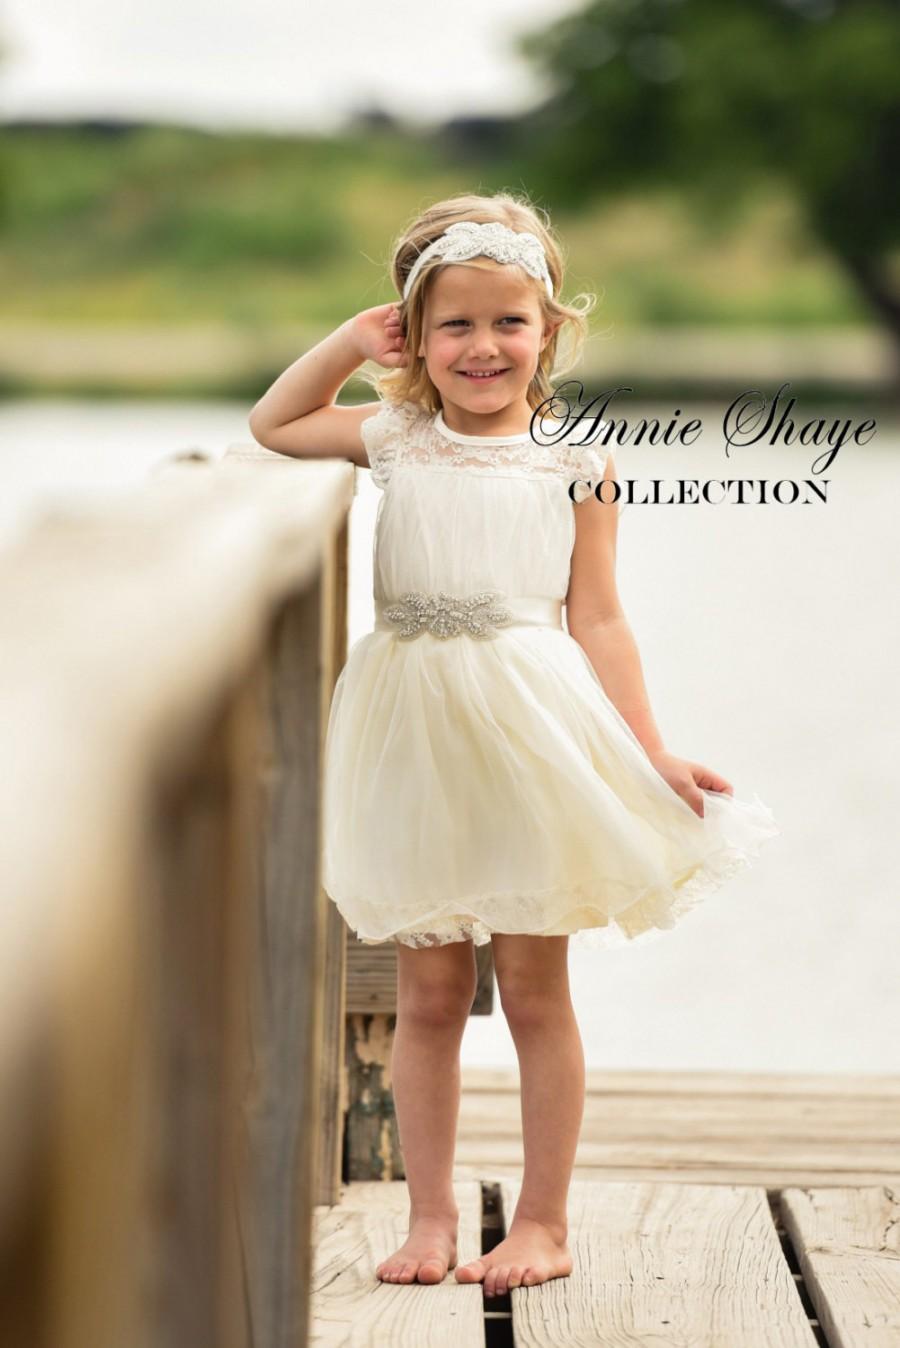 Mariage - Olivia Dress by Annie Shaye - flower girl dress ivory, lace toddler dress made for girls ages 9-12M,1t,2t,3t,4t,5,6,7,8, 9,10,11,12,13,14